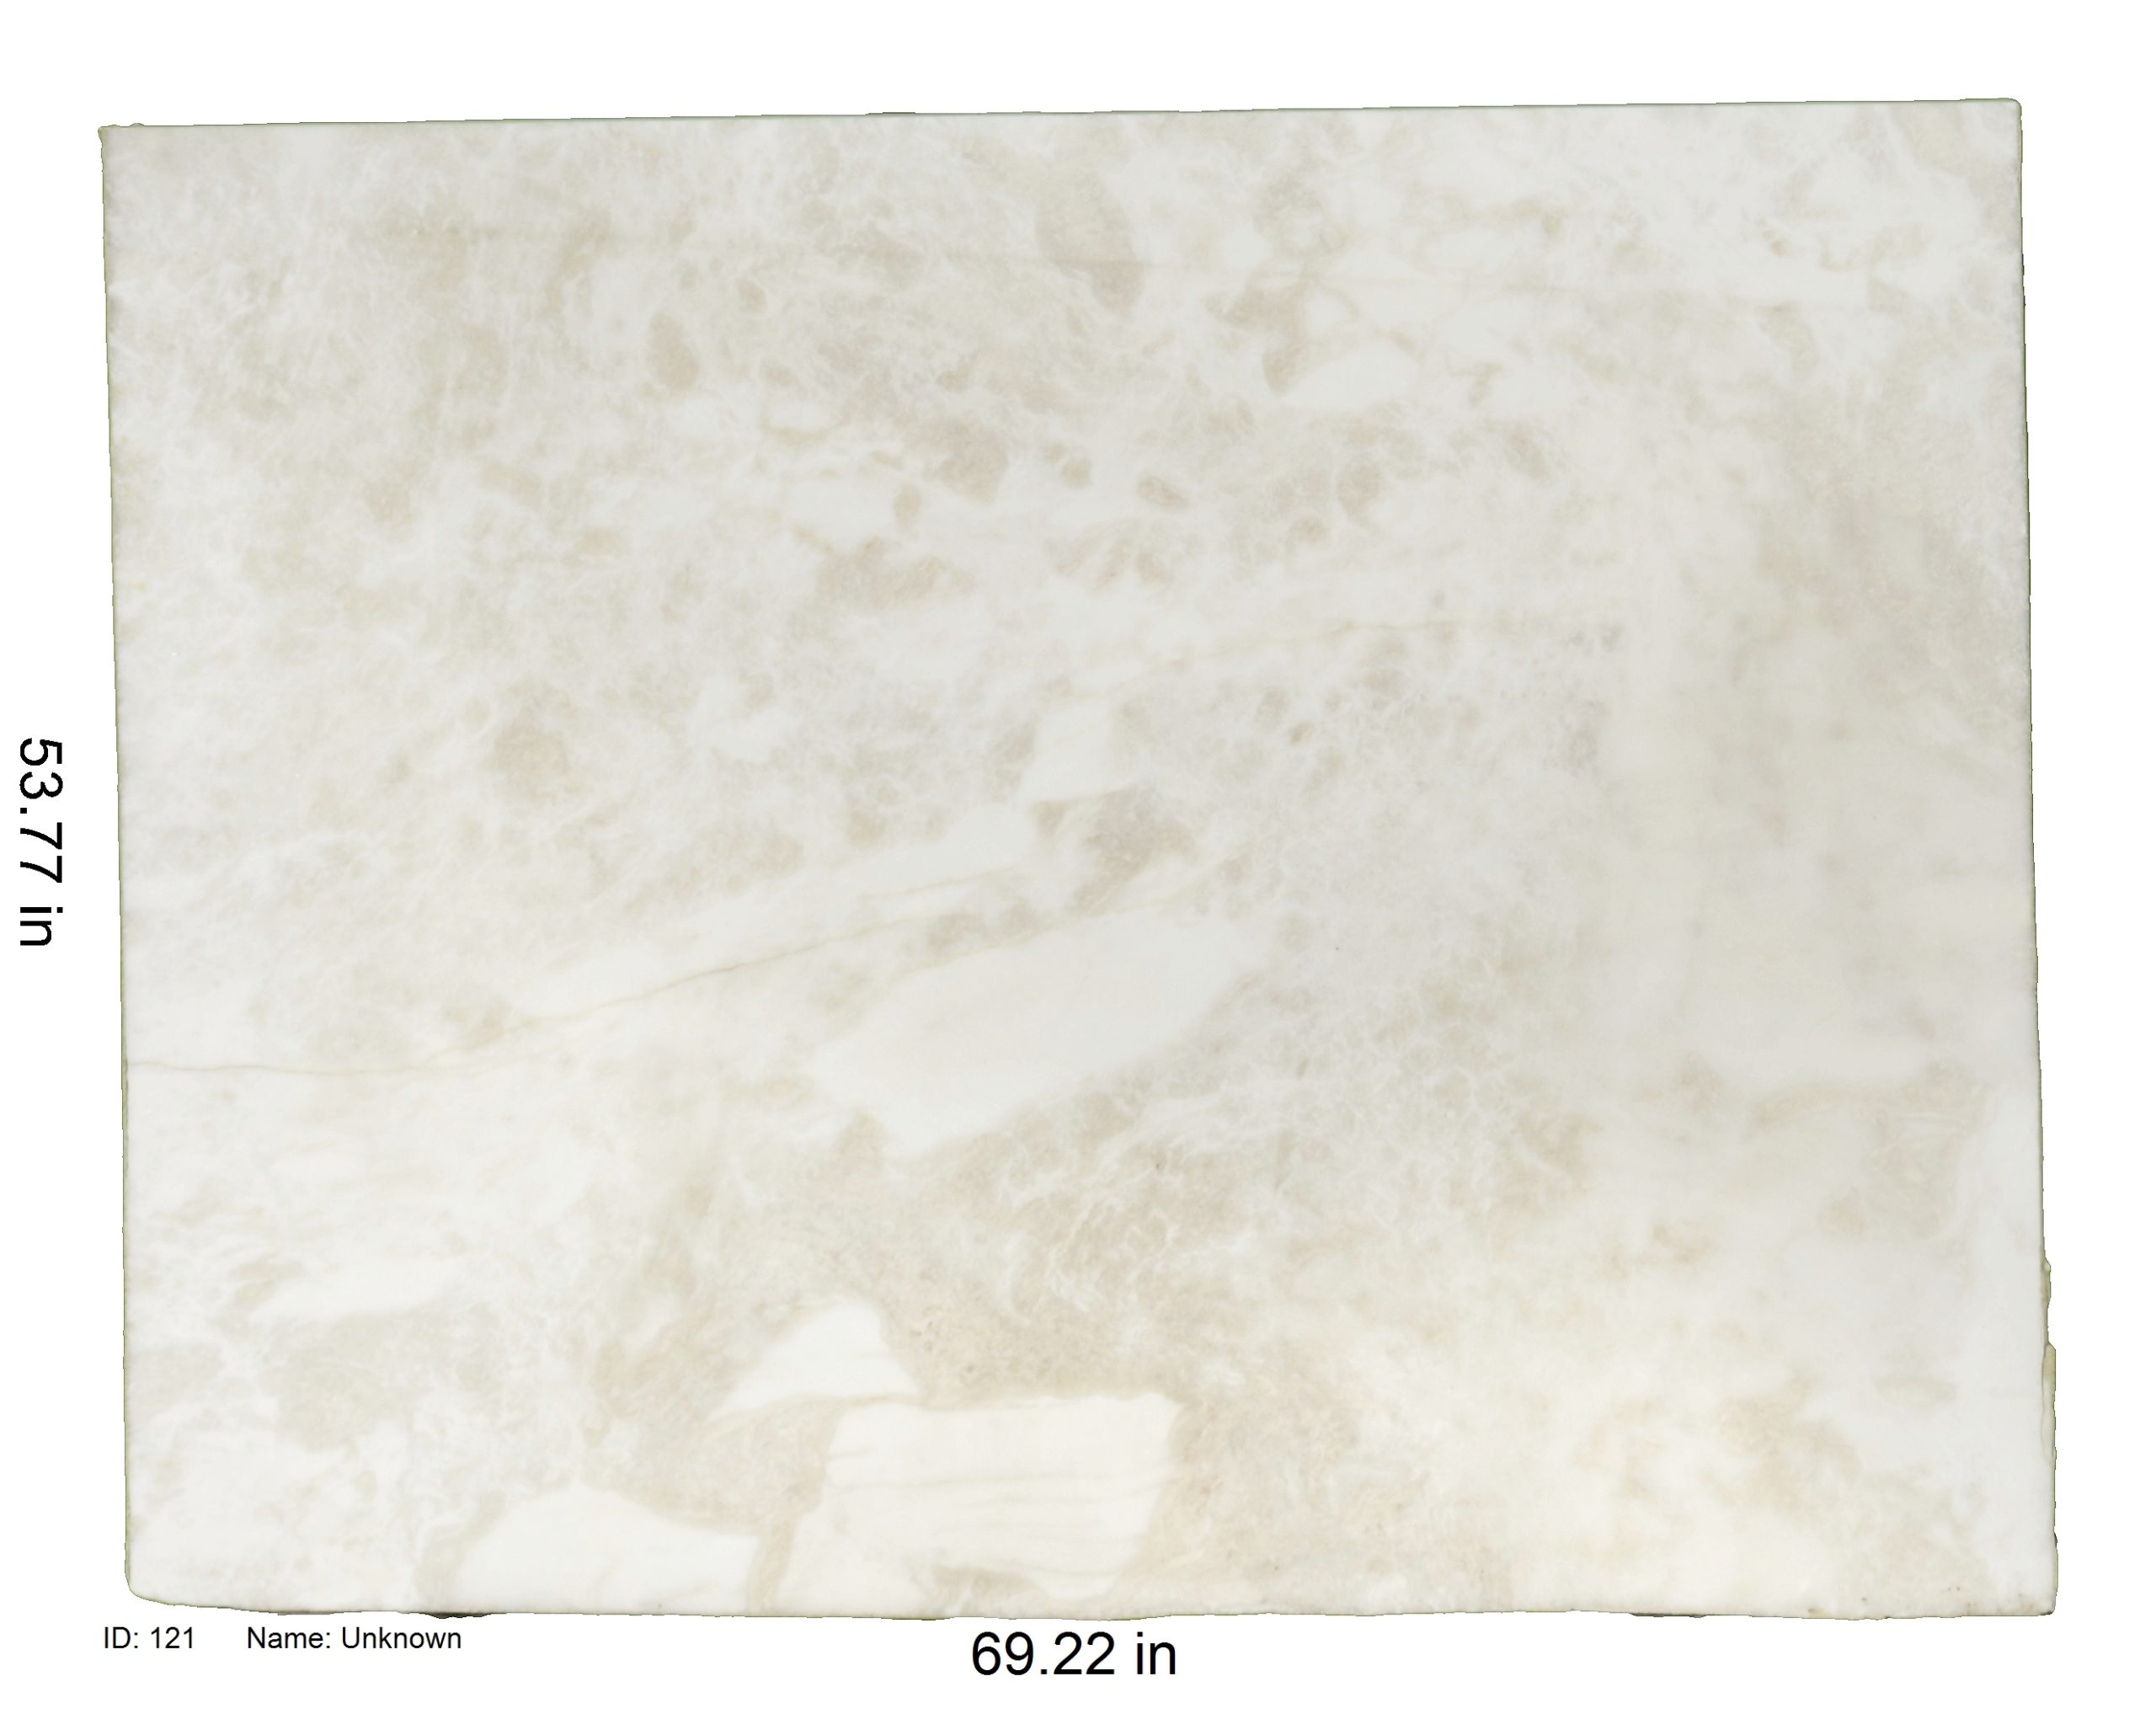 White and Beige Marble<br />
ID: 121<br />
Name: Unknown<br />
Size: 53.77x69.22